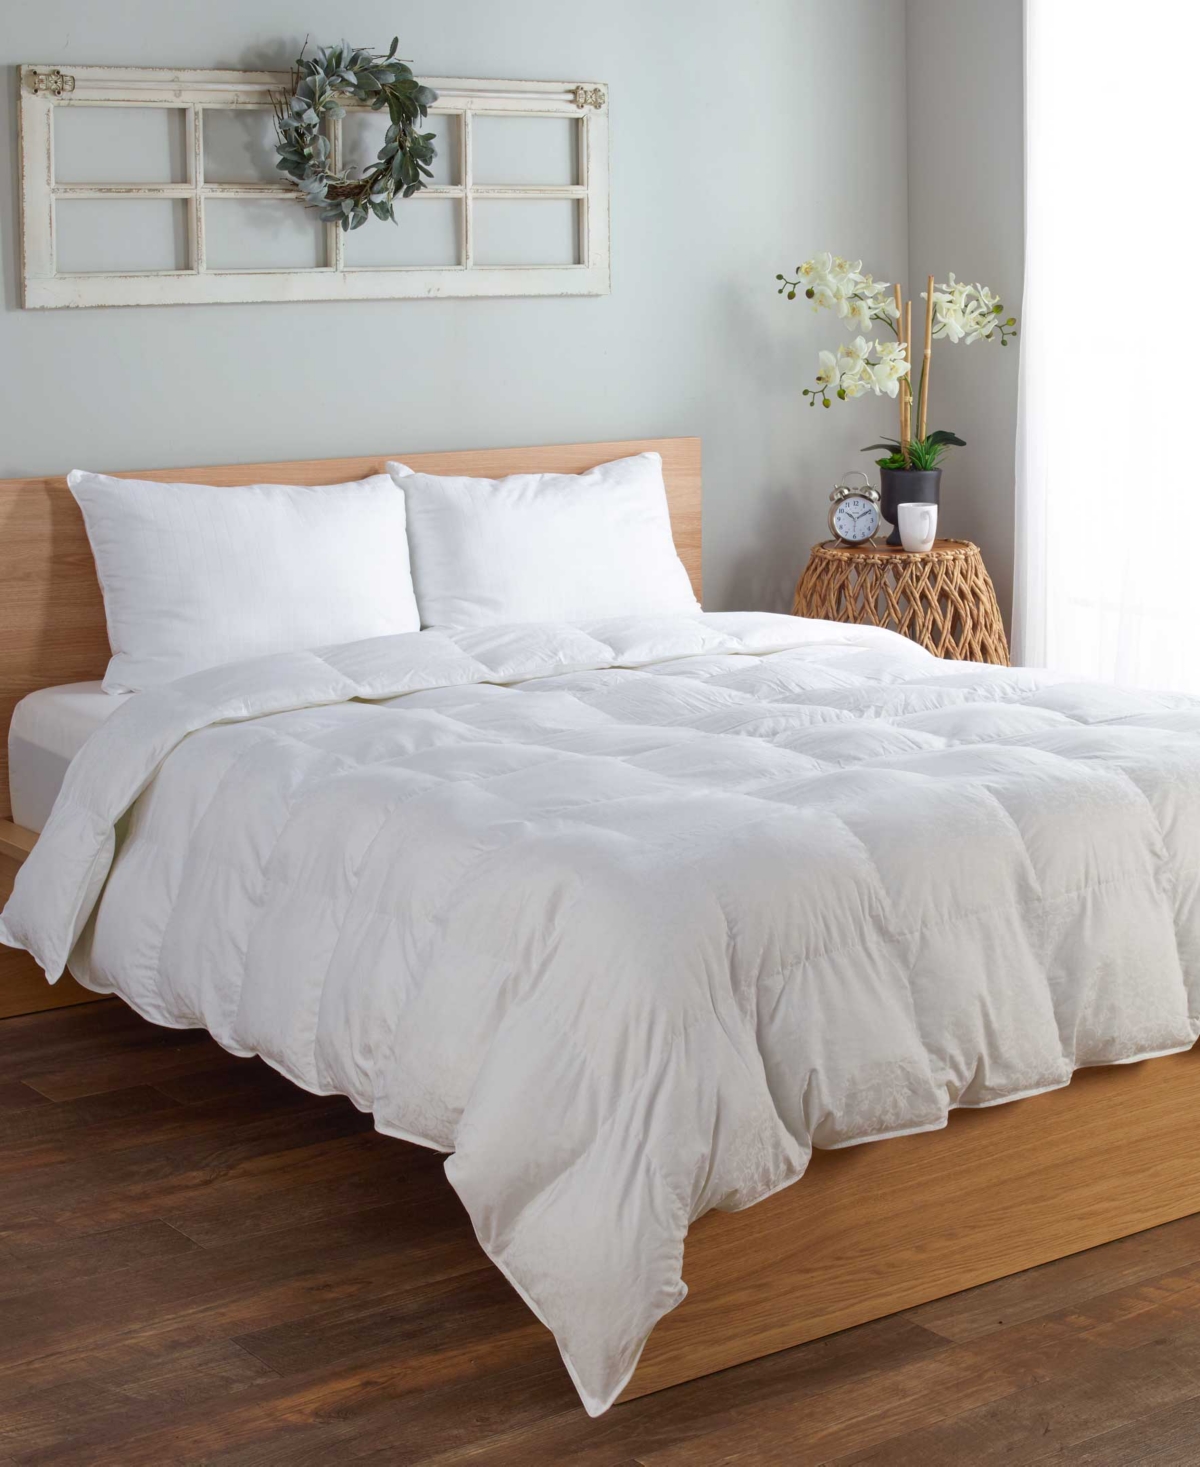 Beyond Down 300 Thread Count Down Alternative Comforter, Full/queen In White